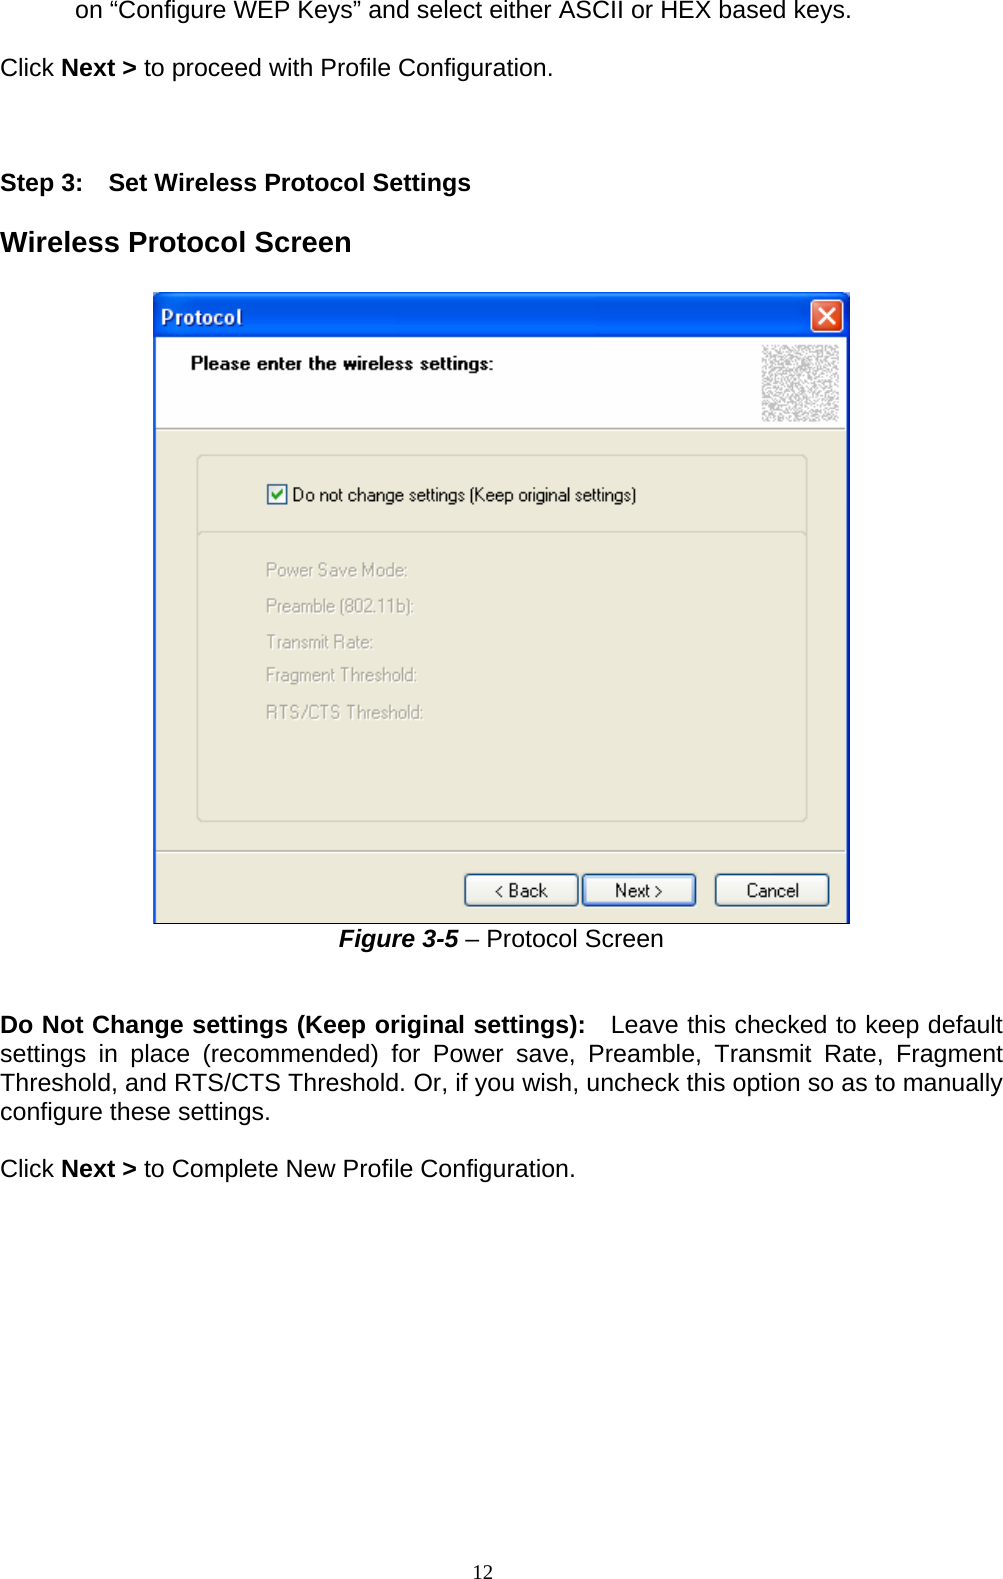 on “Configure WEP Keys” and select either ASCII or HEX based keys.  Click Next &gt; to proceed with Profile Configuration.    Step 3:    Set Wireless Protocol Settings  Wireless Protocol Screen   Figure 3-5 – Protocol Screen   Do Not Change settings (Keep original settings):  Leave this checked to keep default settings in place (recommended) for Power save, Preamble, Transmit Rate, Fragment Threshold, and RTS/CTS Threshold. Or, if you wish, uncheck this option so as to manually configure these settings.    Click Next &gt; to Complete New Profile Configuration.  12   